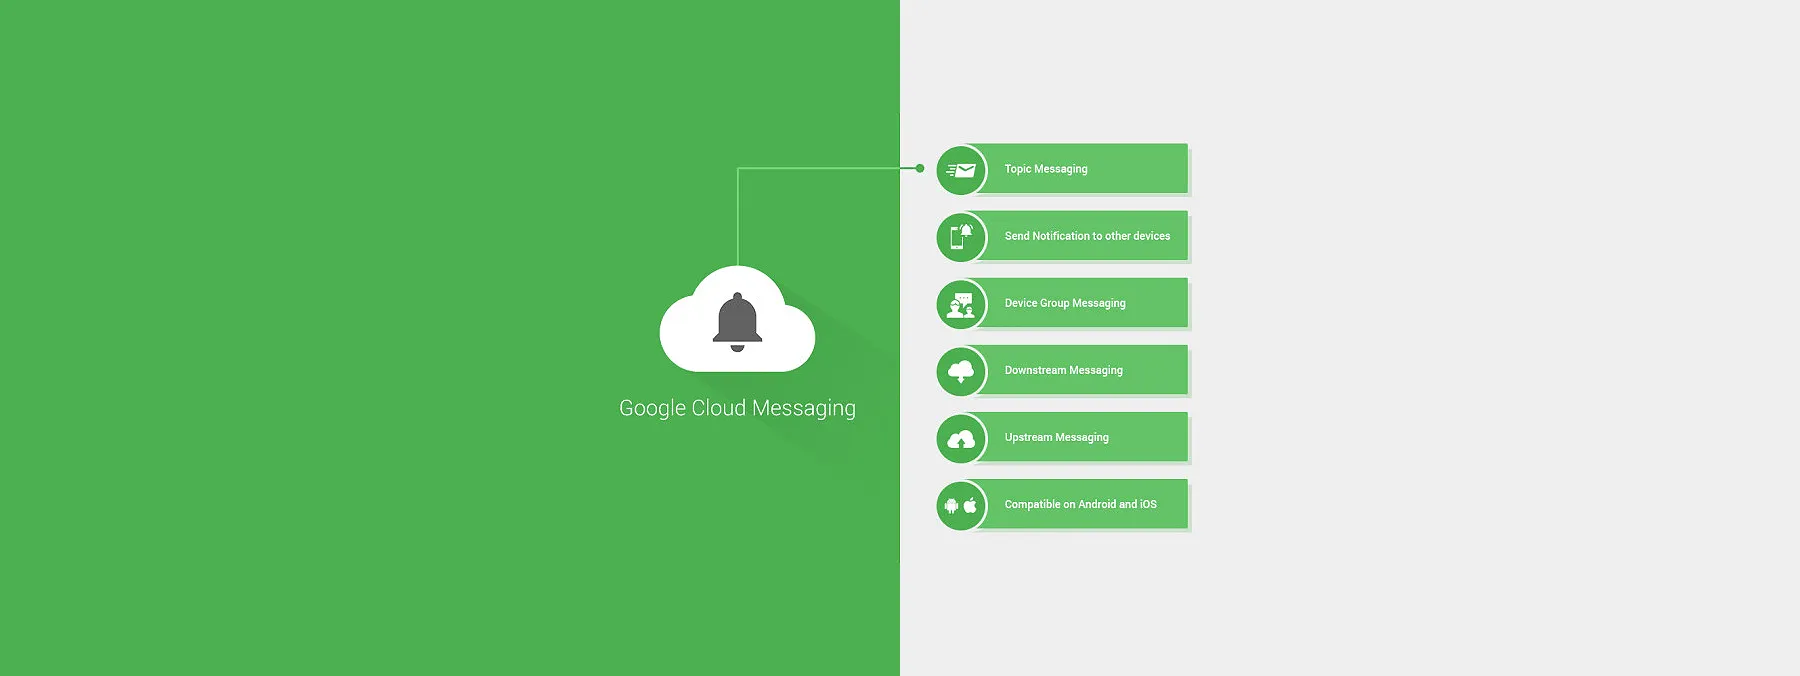 Google Cloud Messaging (GCM) now Supports iOS for Push Notifications